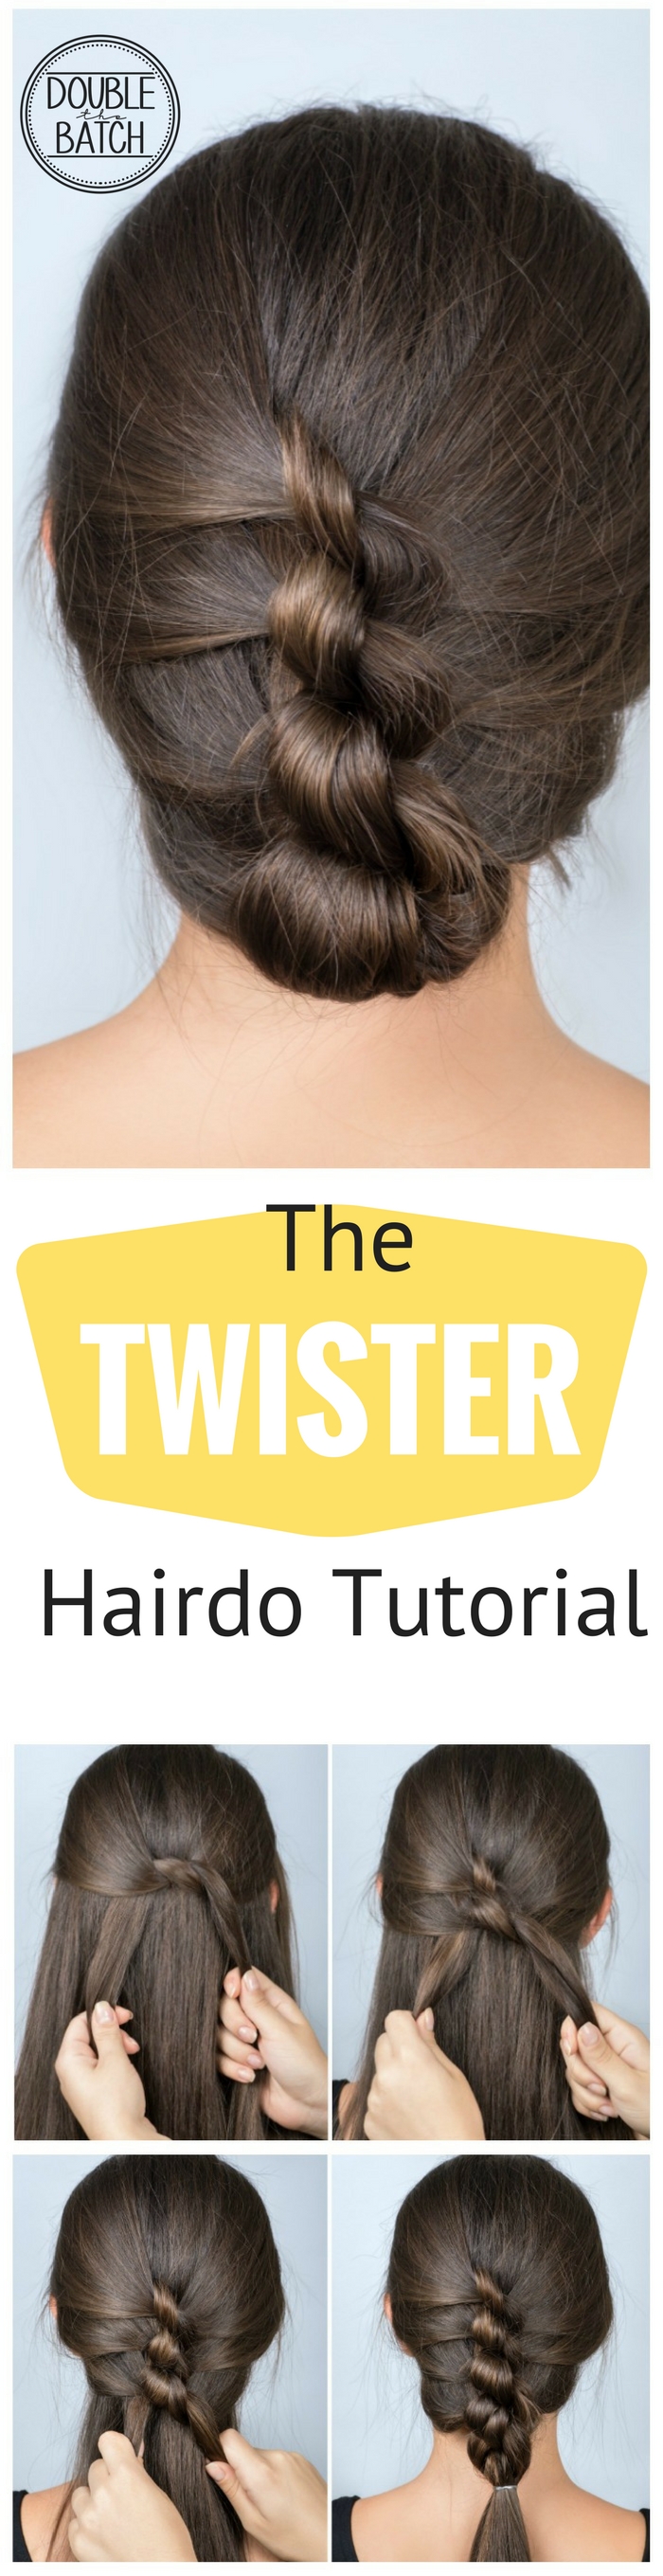 Super simple hairstyles for School: TWISTER Hairstyle Tutorial